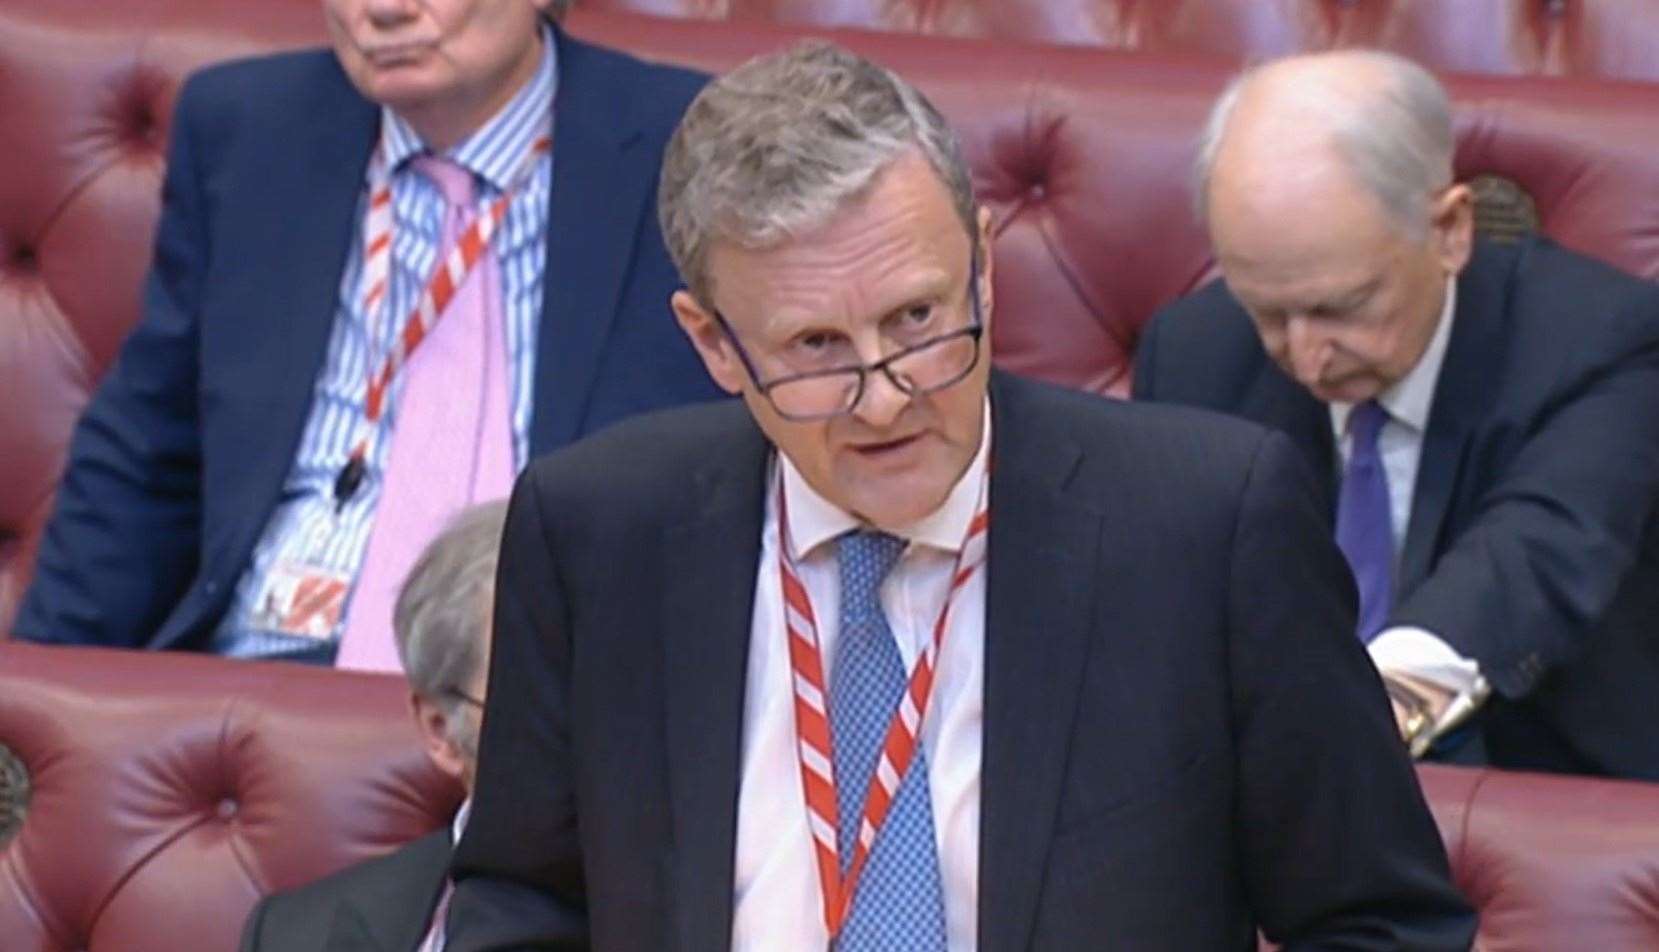 Home Office minister Lord Sharpe of Epsom addresses peers (PA)